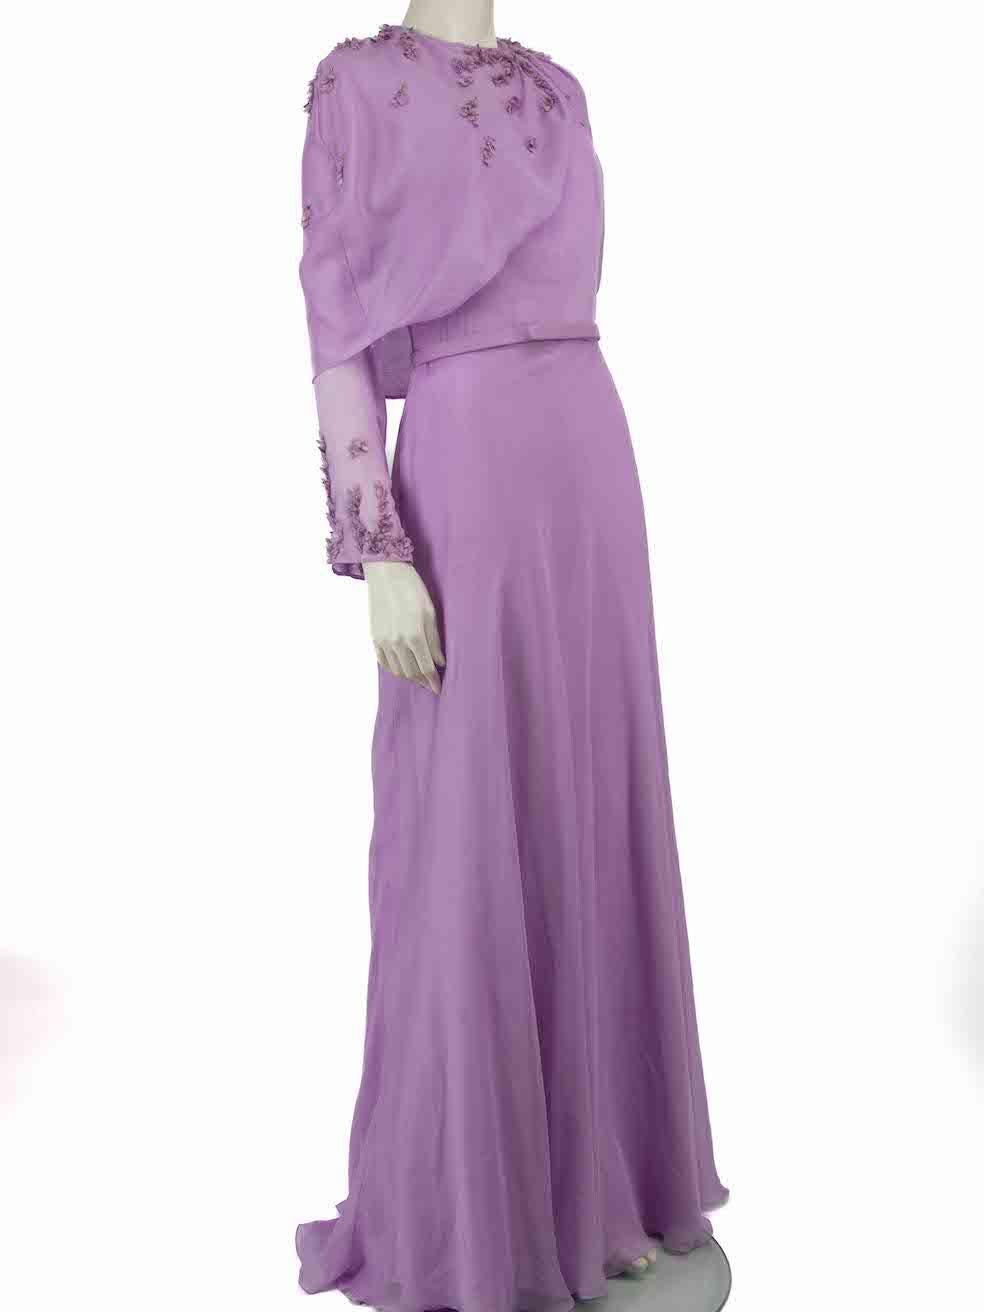 CONDITION is Very good. Hardly any visible wear to dress is evident on this used Honayda designer resale item.
 
 
 
 Details
 
 
 Purple
 
 Polyester chiffon
 
 Dress, belt and cape
 
 Floral embroidery
 
 Maxi dress
 
 Round neck
 
 Long sheer